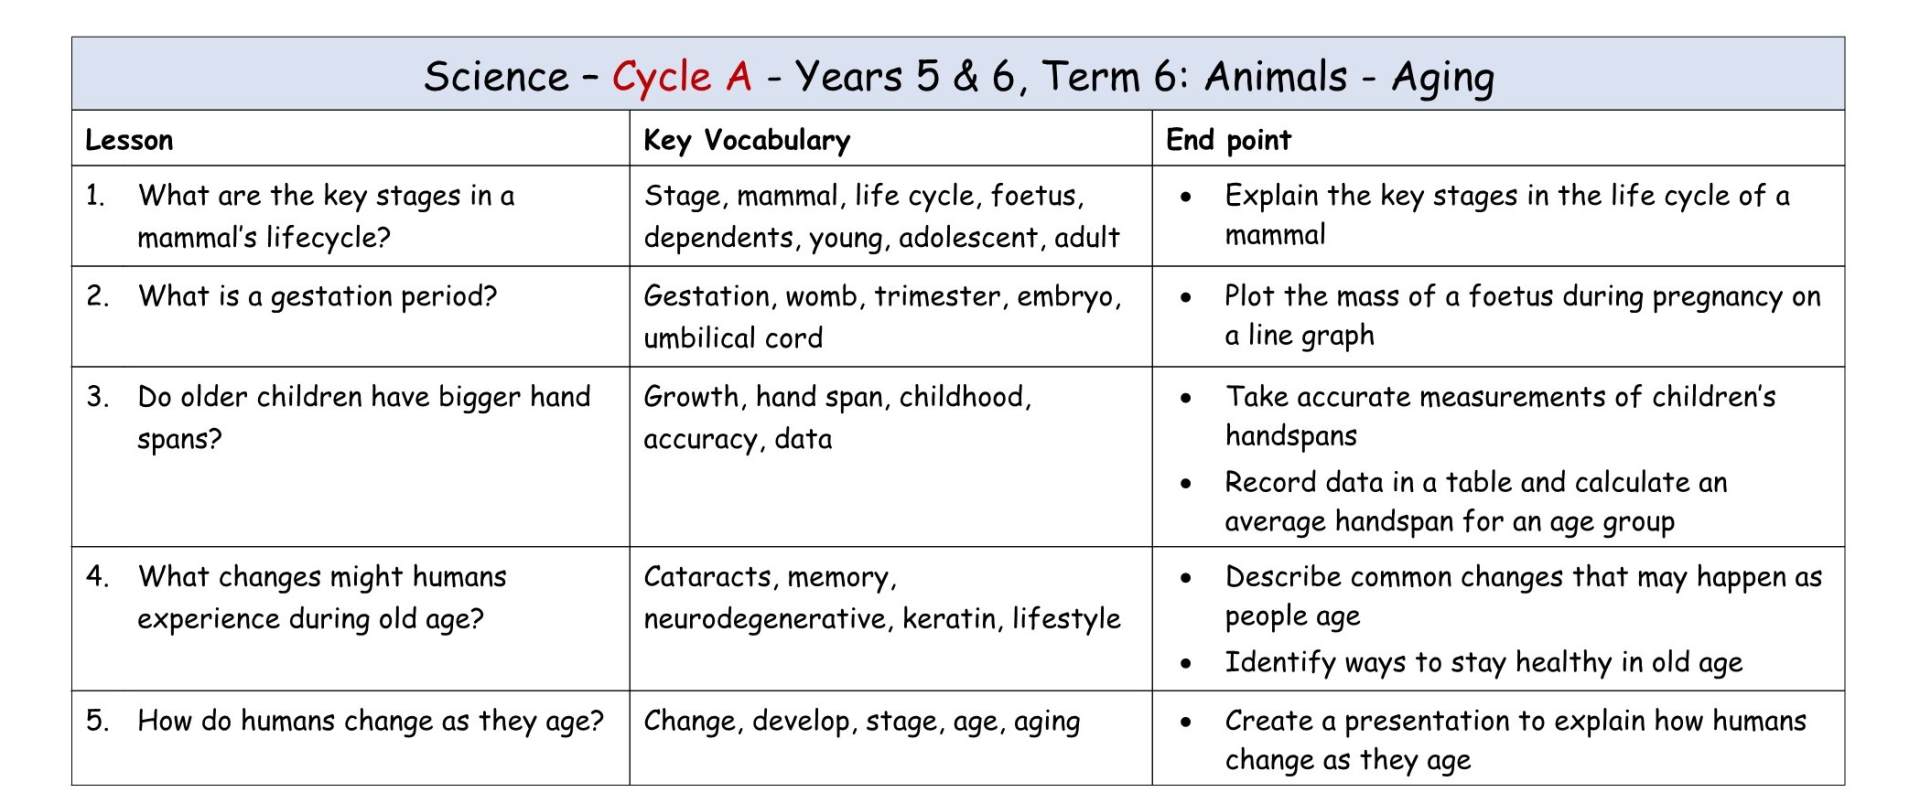 Science Y5-6 Cycle A T6